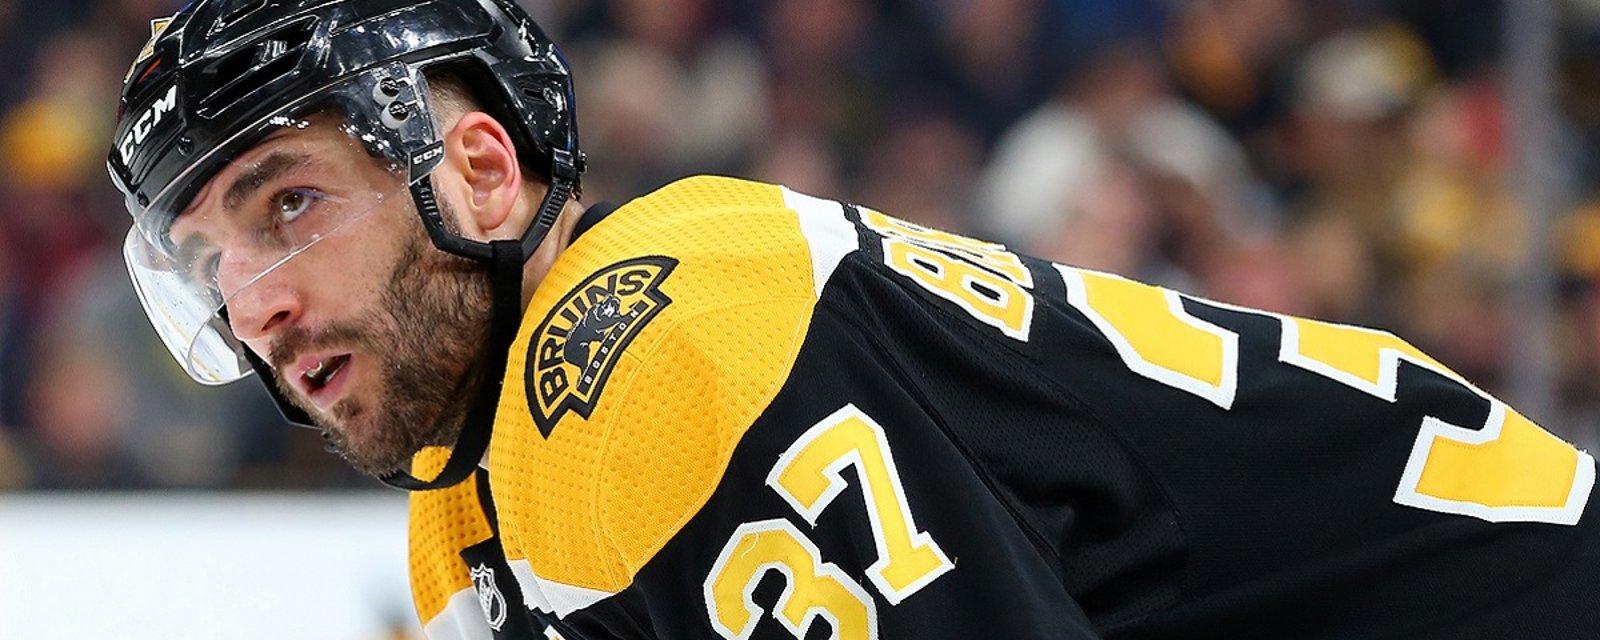 Bruins insider concerned about the health of Patrice Bergeron.